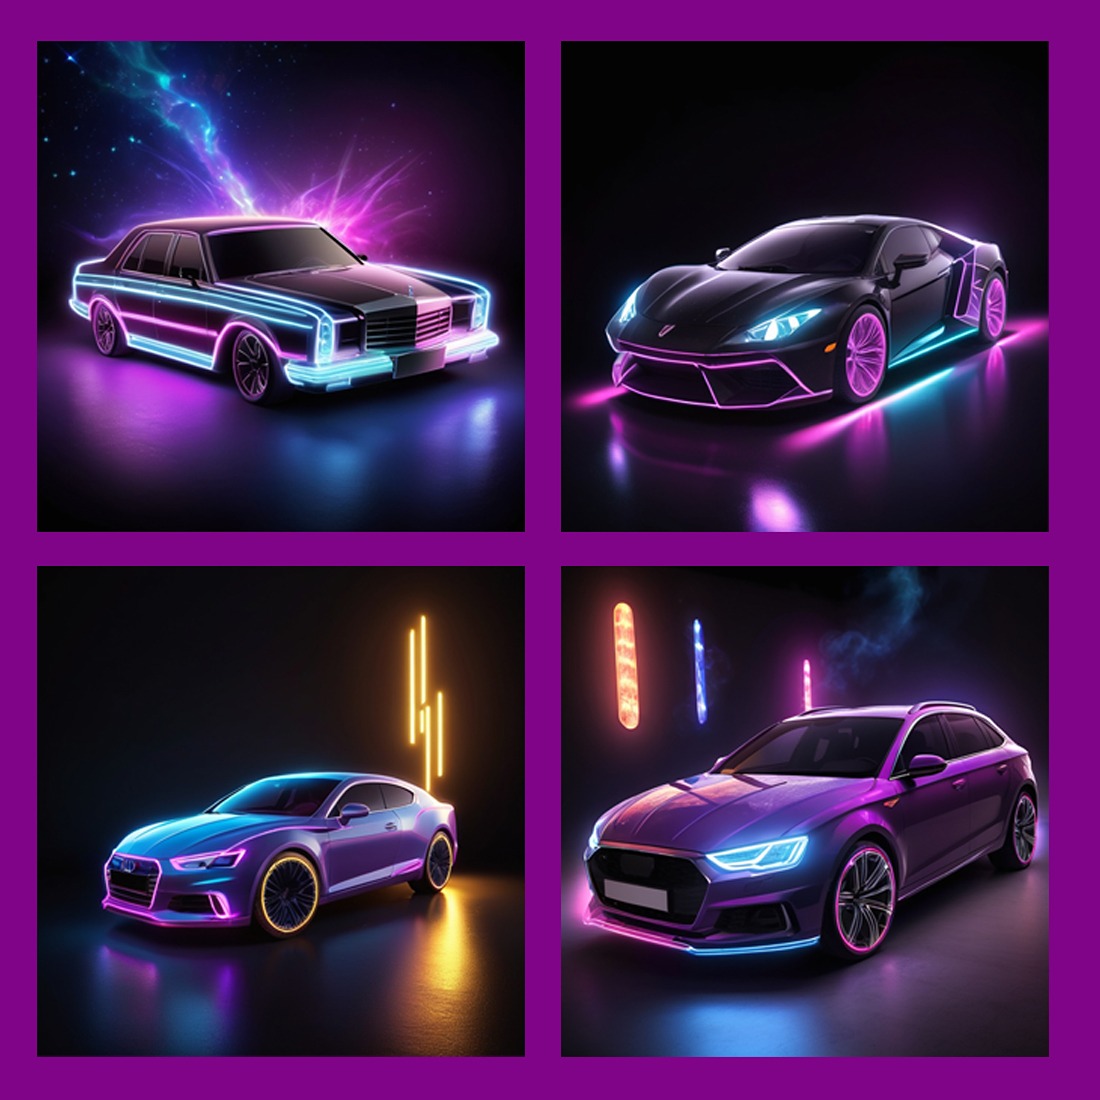 Car - Magic Light Effect, Neon Effect, Car Images Total = 04 cover image.